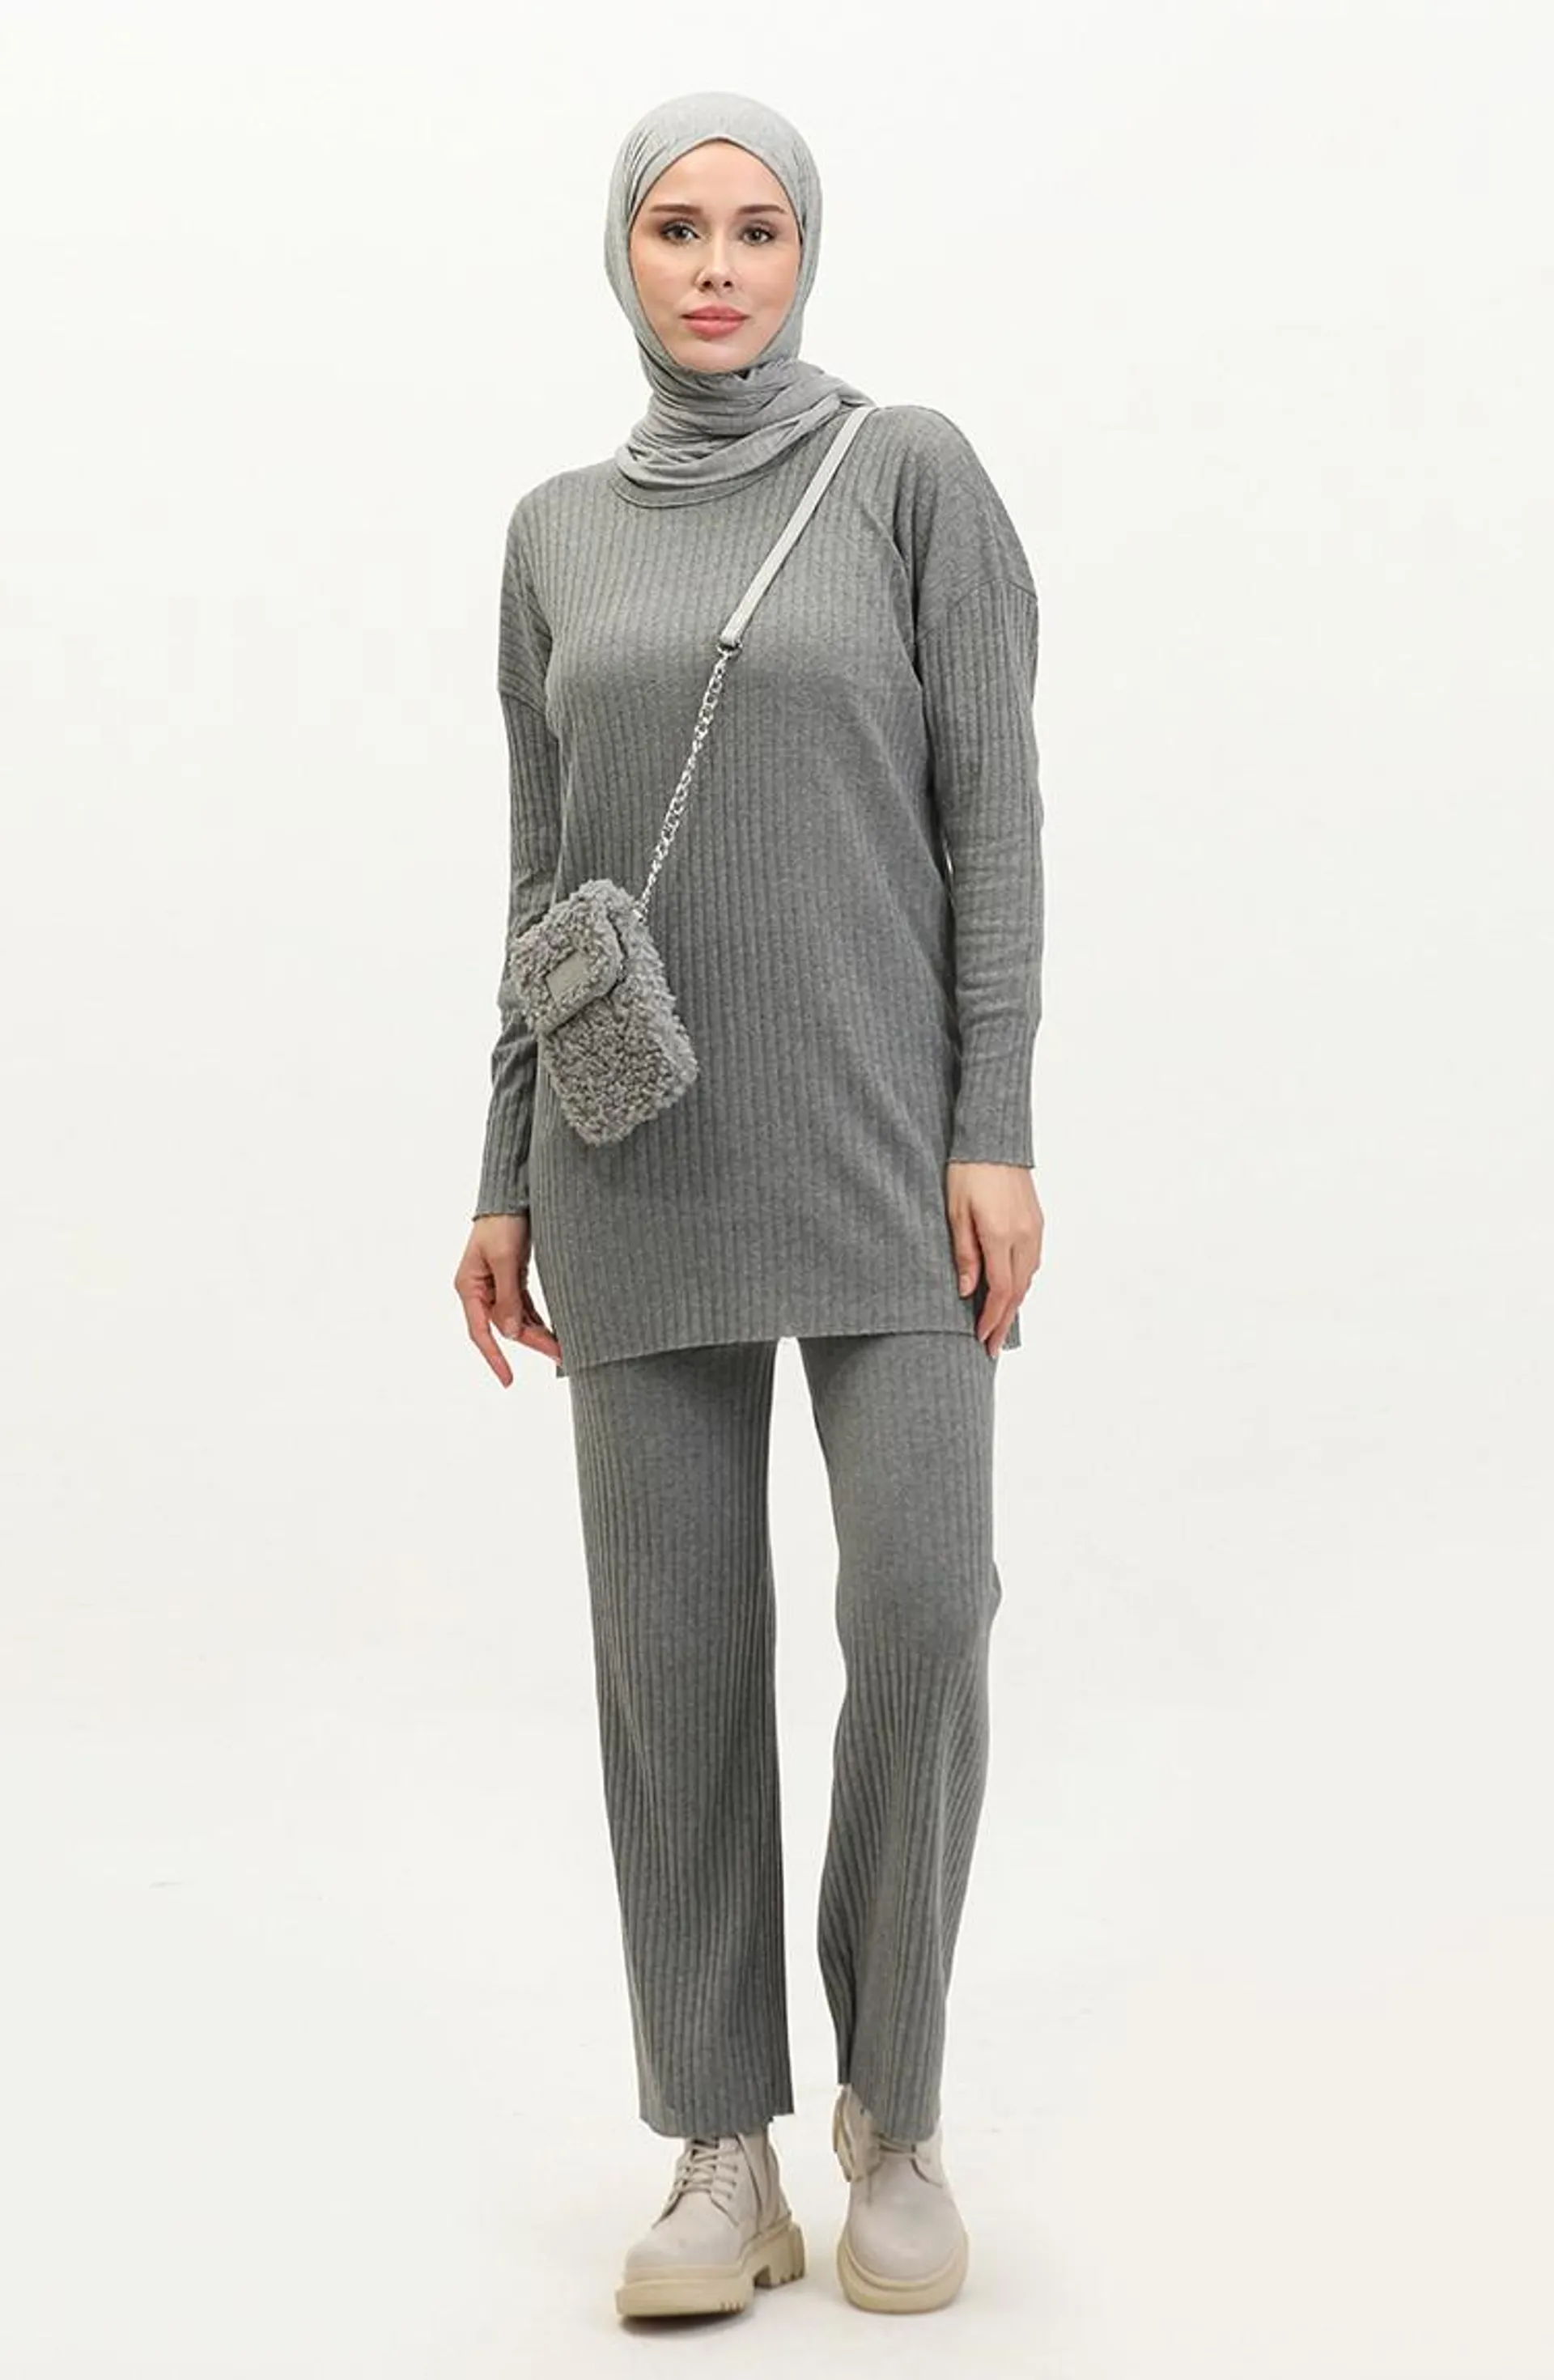 Camisole Two Piece Suit 1021-08 Gray 1021-08